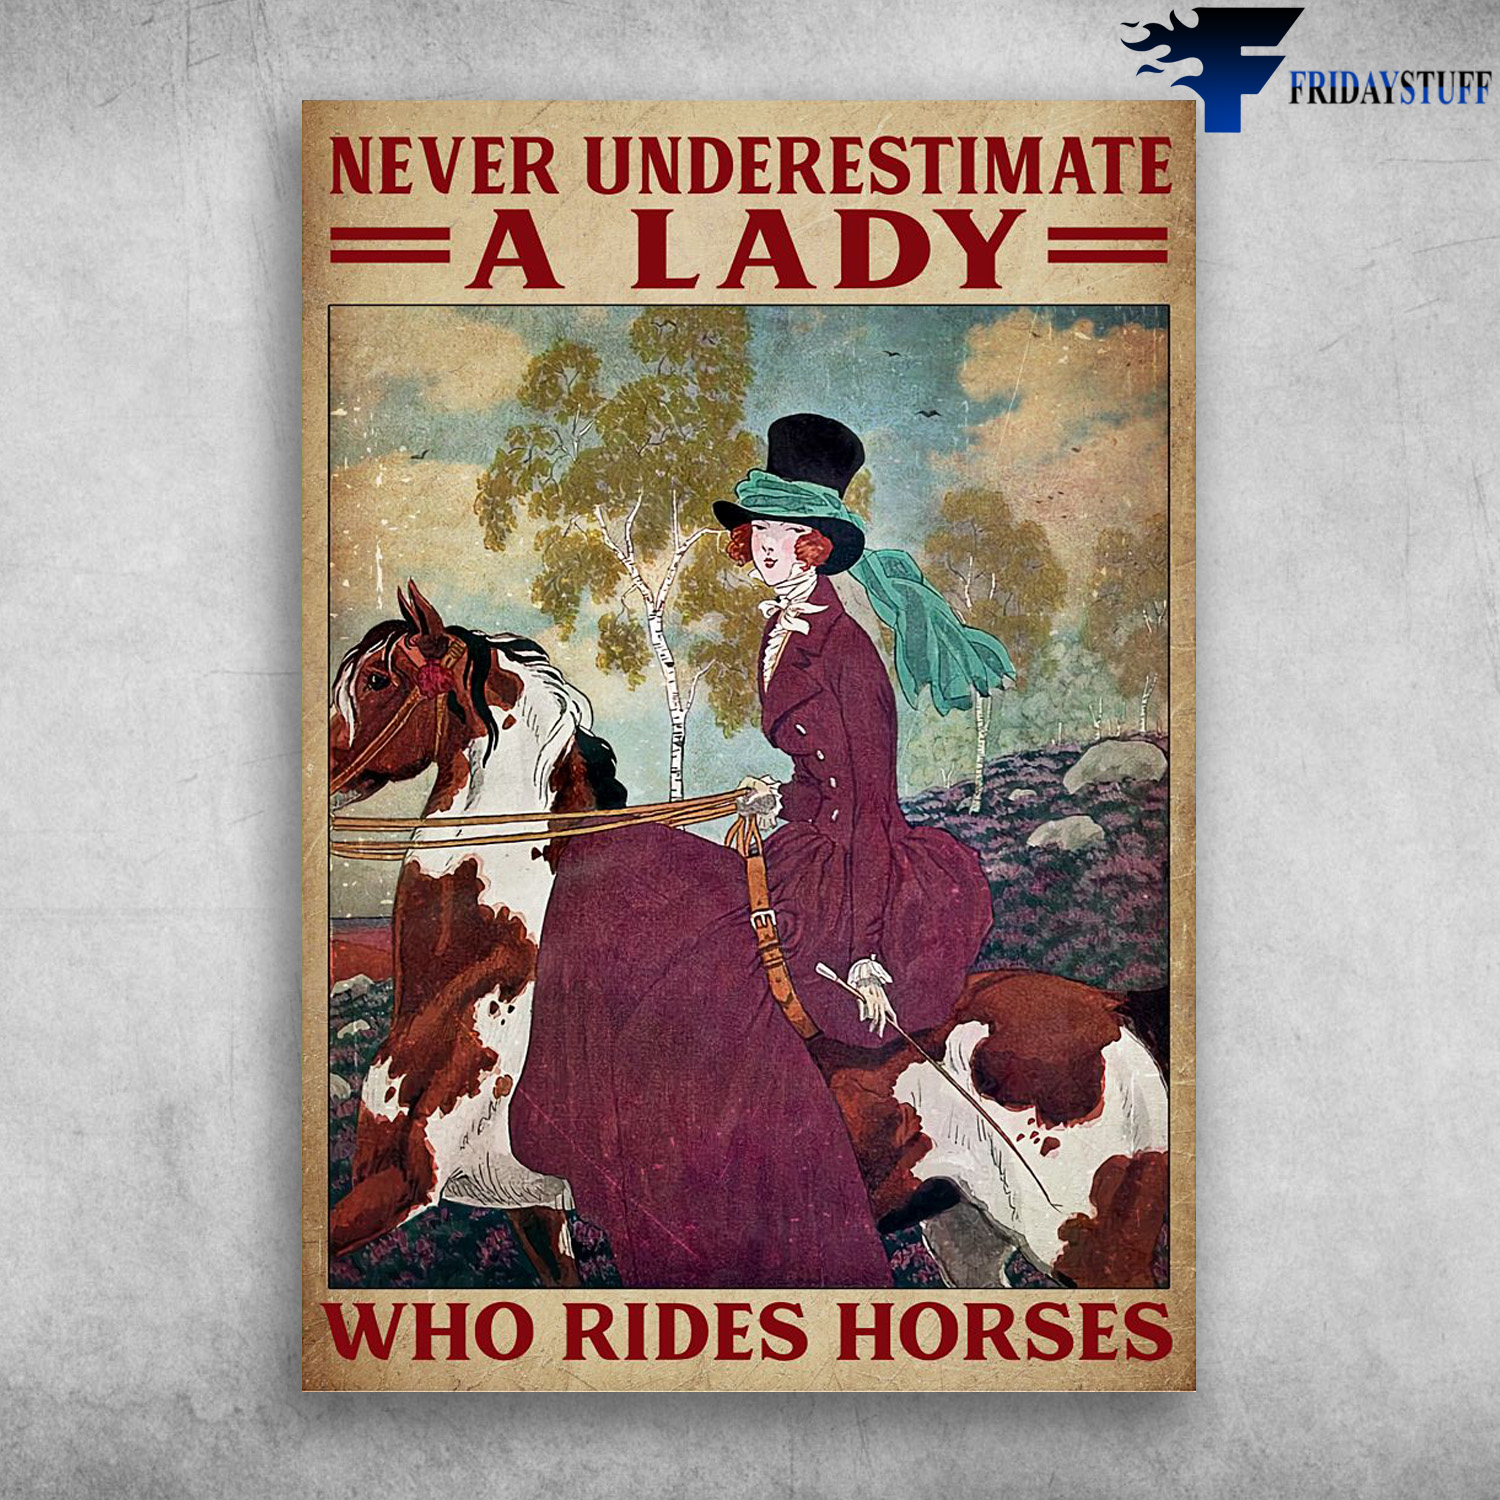 Lady Riding Horse - Never Underestimate A Lady, Who Rides Horses